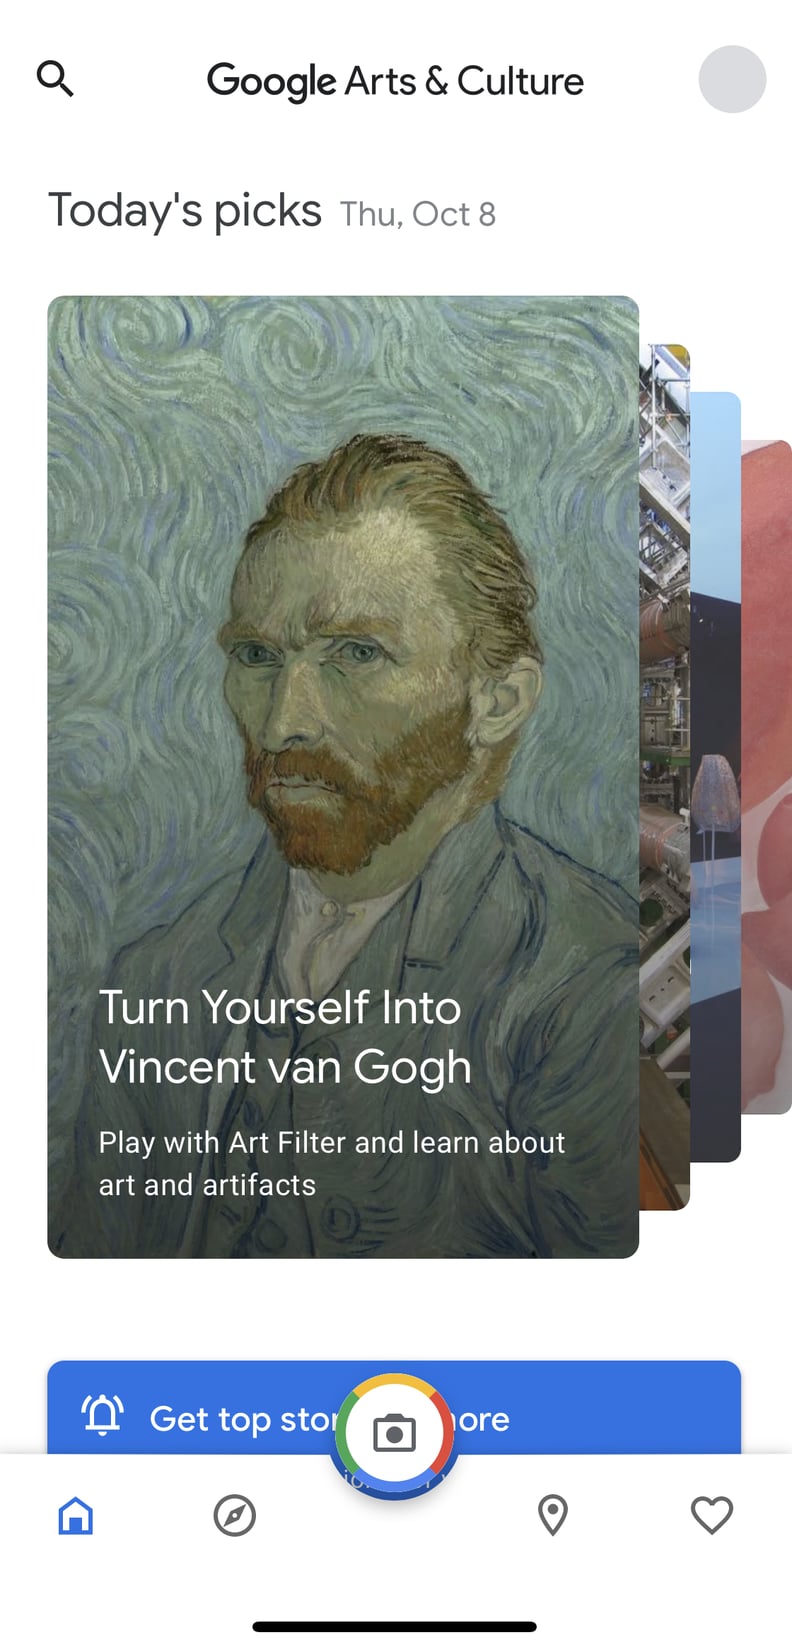 On the App's Home Screen, Click Where It Says "Turn Yourself Into Vincent van Gogh"